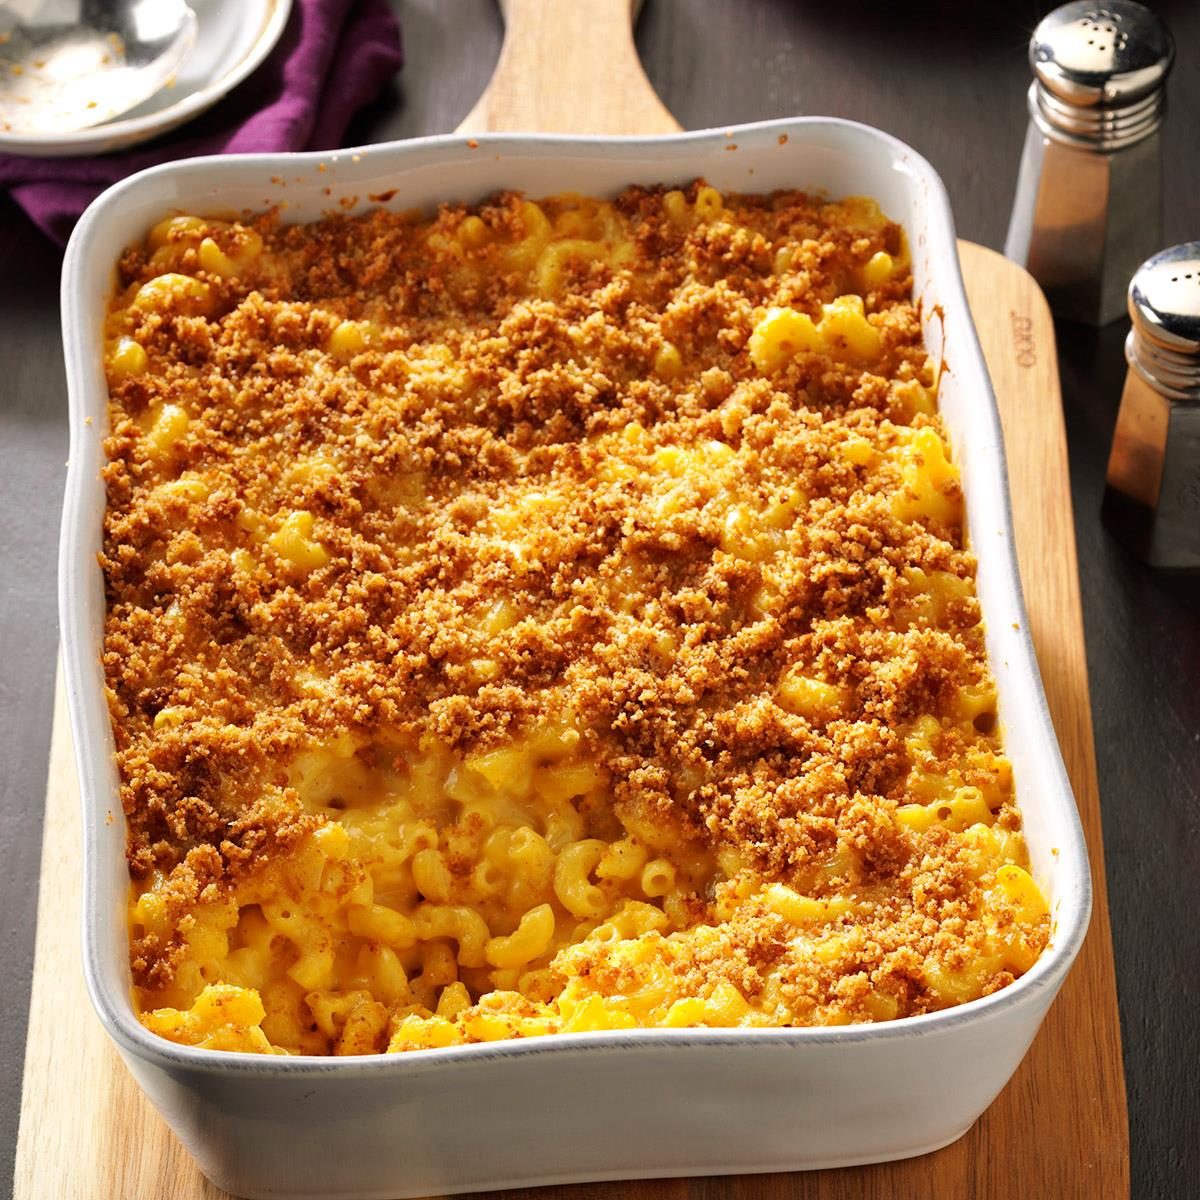 Baked Mac And Cheese Exps Sddj17 25257 D08 04 4b 9